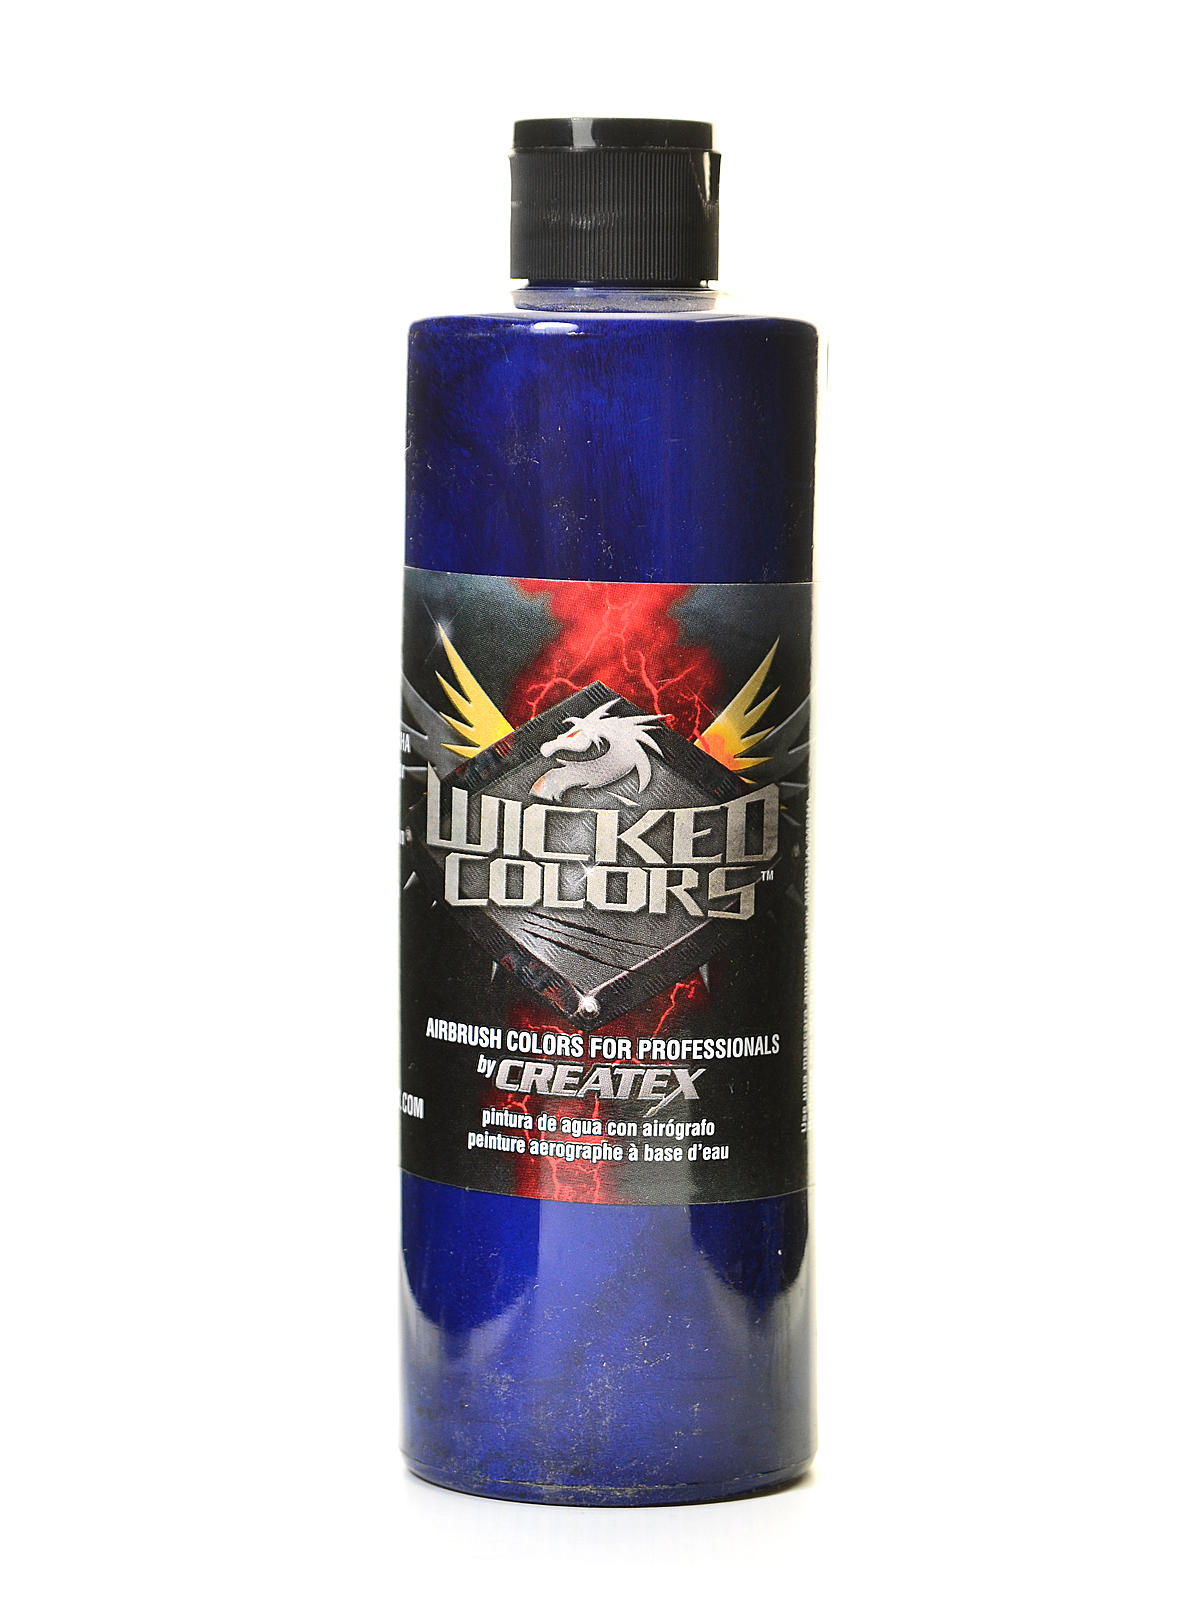 Wicked Colors Deep Blue 16 Oz.